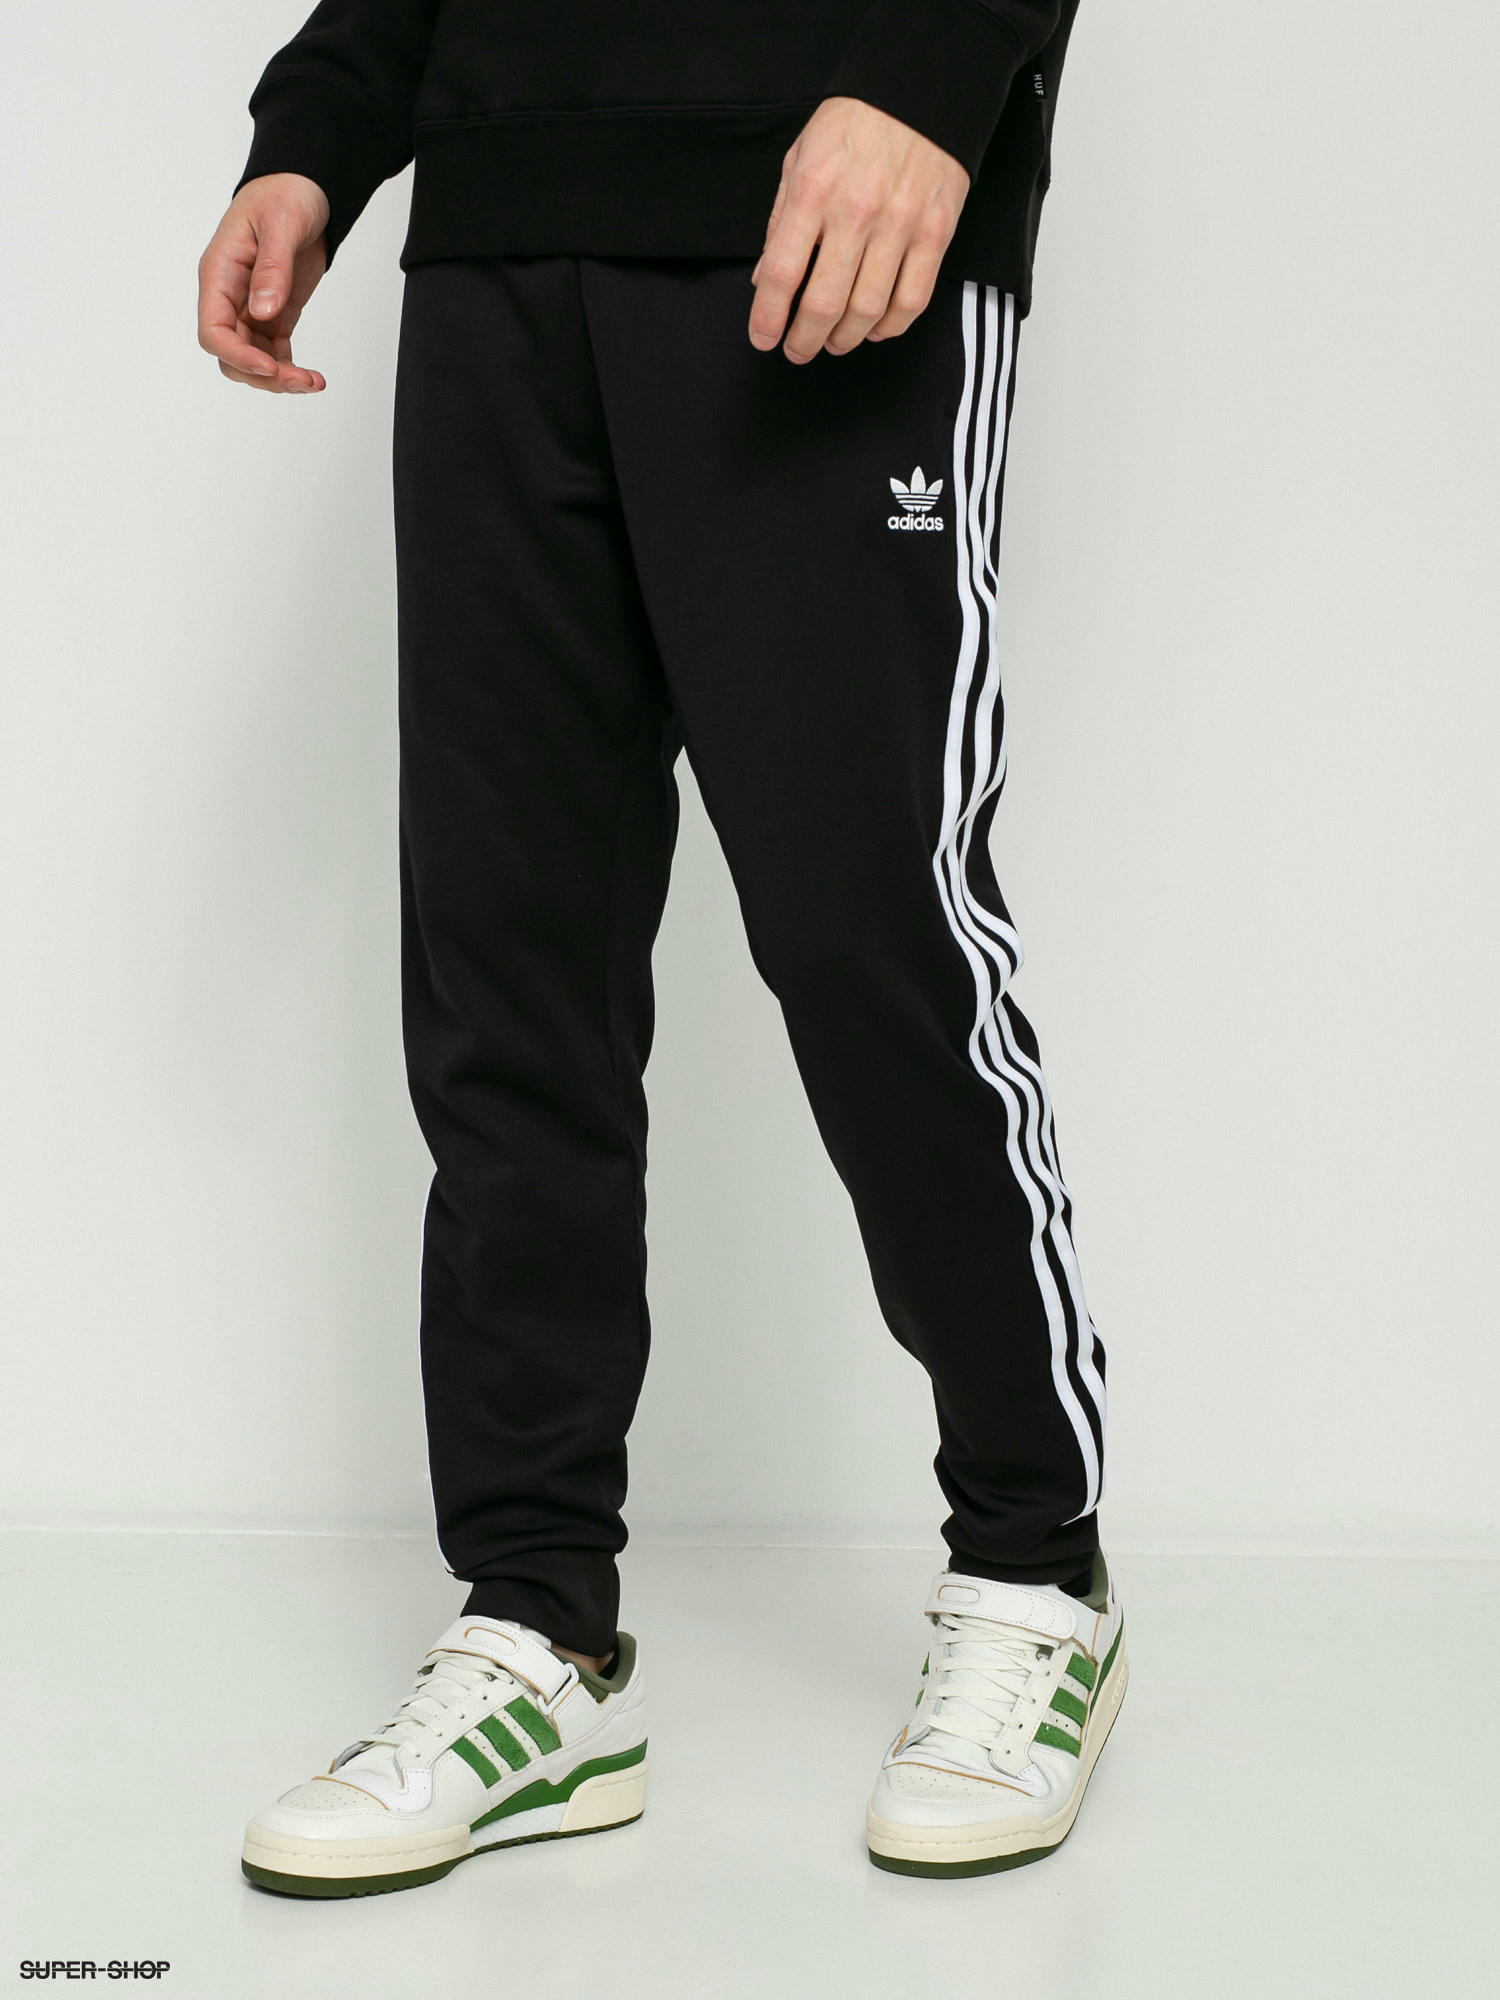 adidas Originals Pant Black Casual Track Pant Buy adidas Originals Pant  Black Casual Track Pant Online at Best Price in India  Nykaa